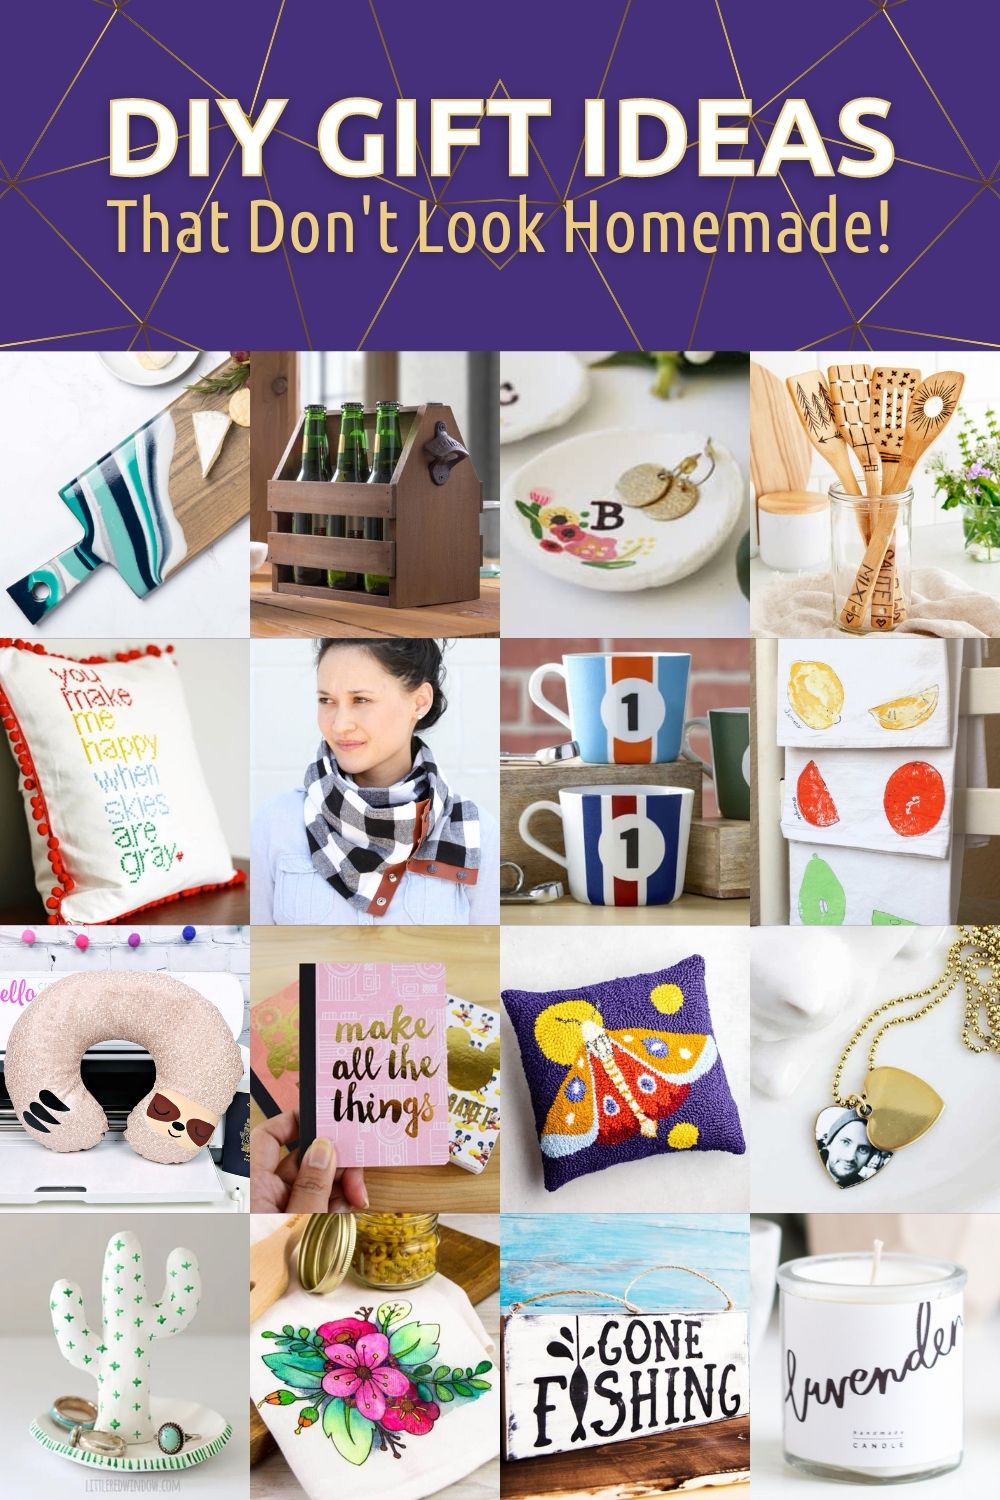 30+ DIY Handmade Christmas Gift Ideas You Can Give This Year!